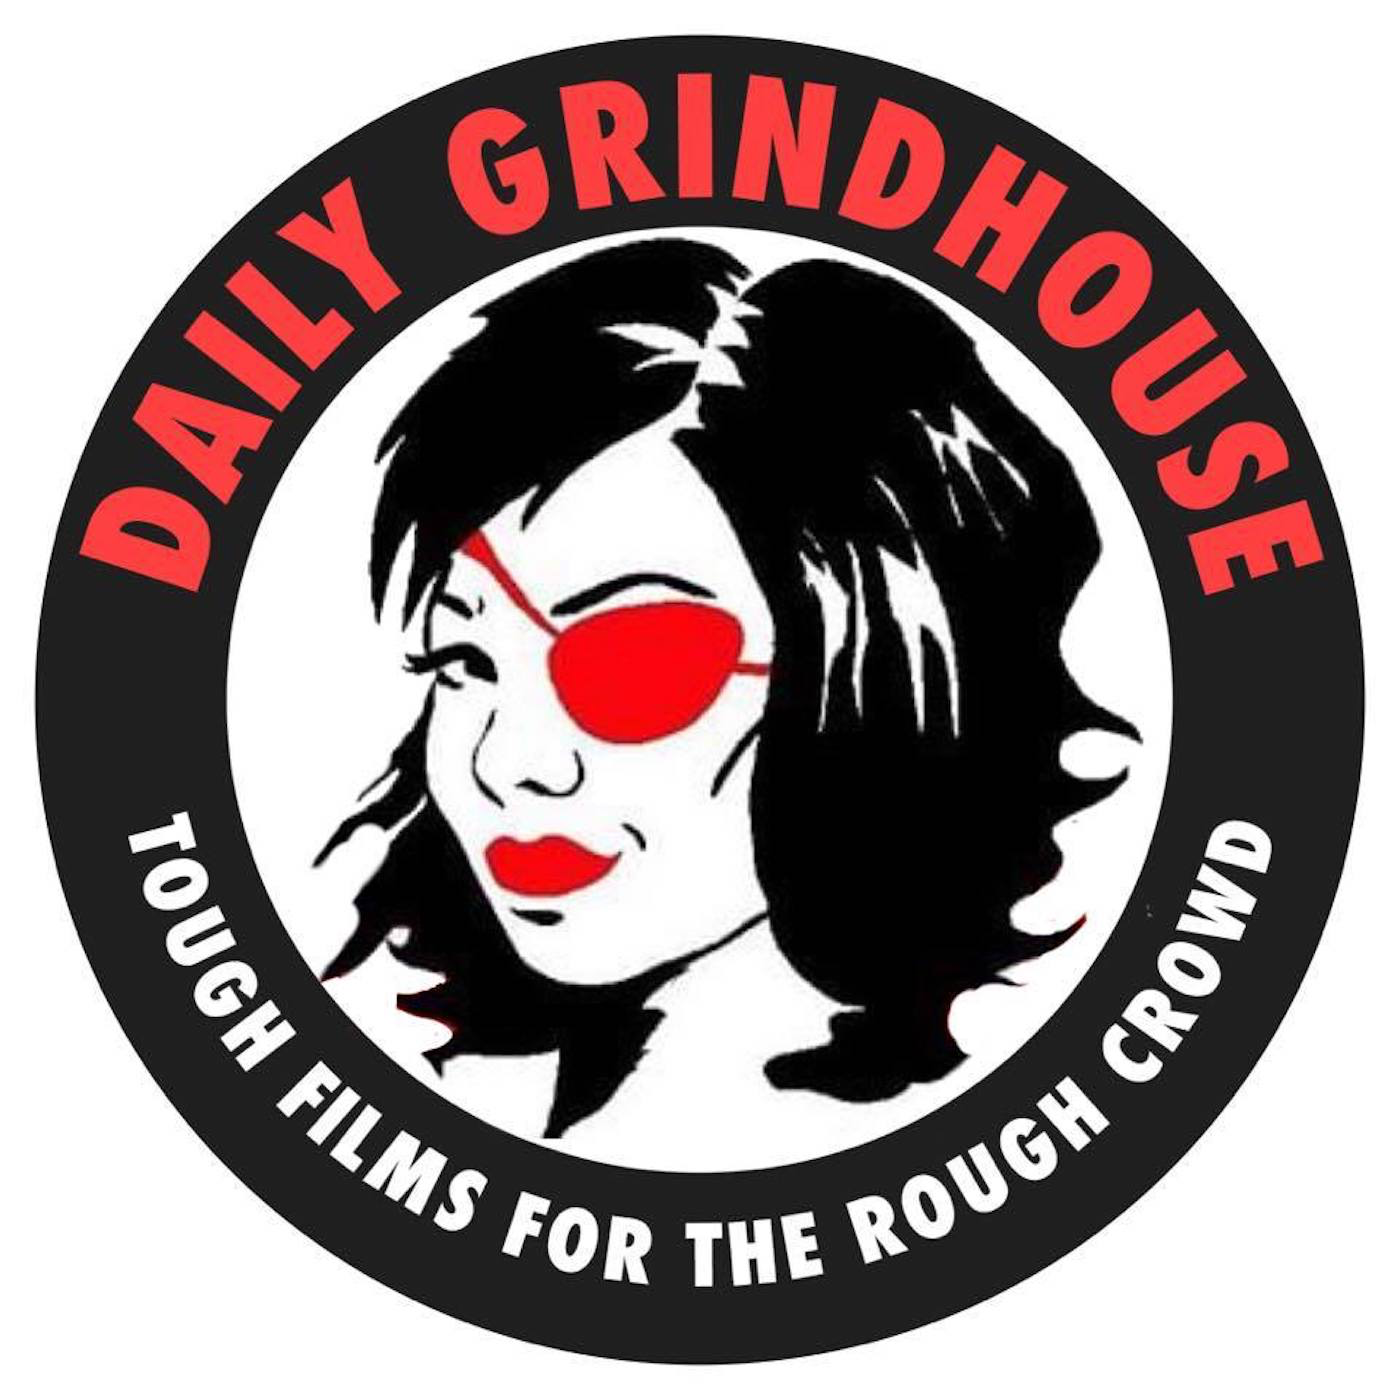 Daily Grindhouse | NETFLIX SET TO RELAUNCH 17 ADDITIONAL 